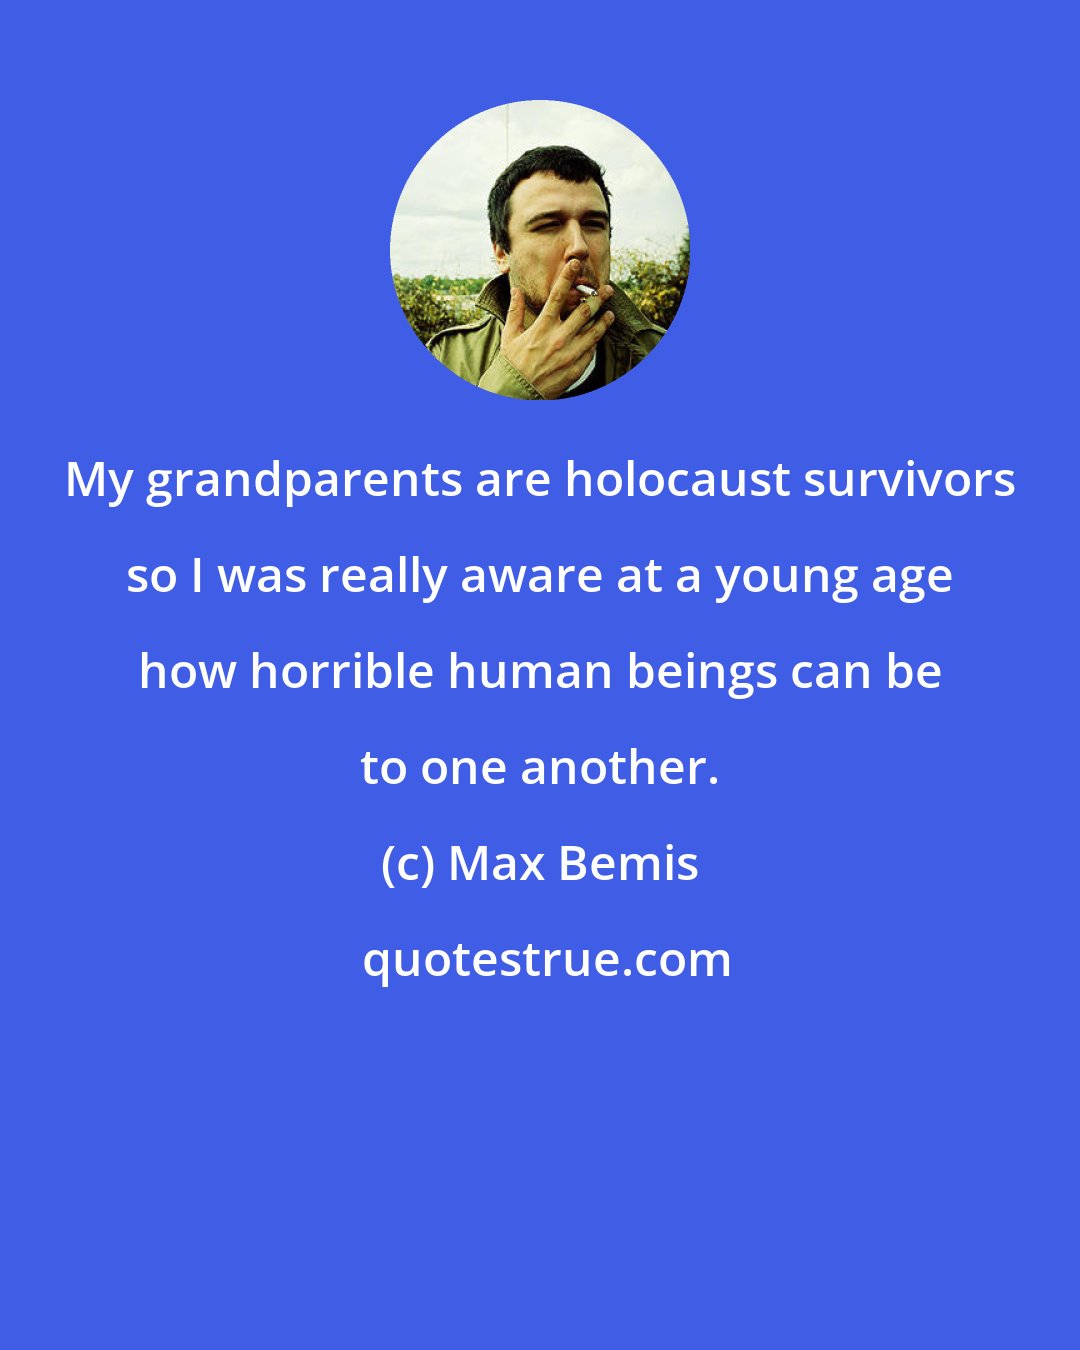 Max Bemis: My grandparents are holocaust survivors so I was really aware at a young age how horrible human beings can be to one another.